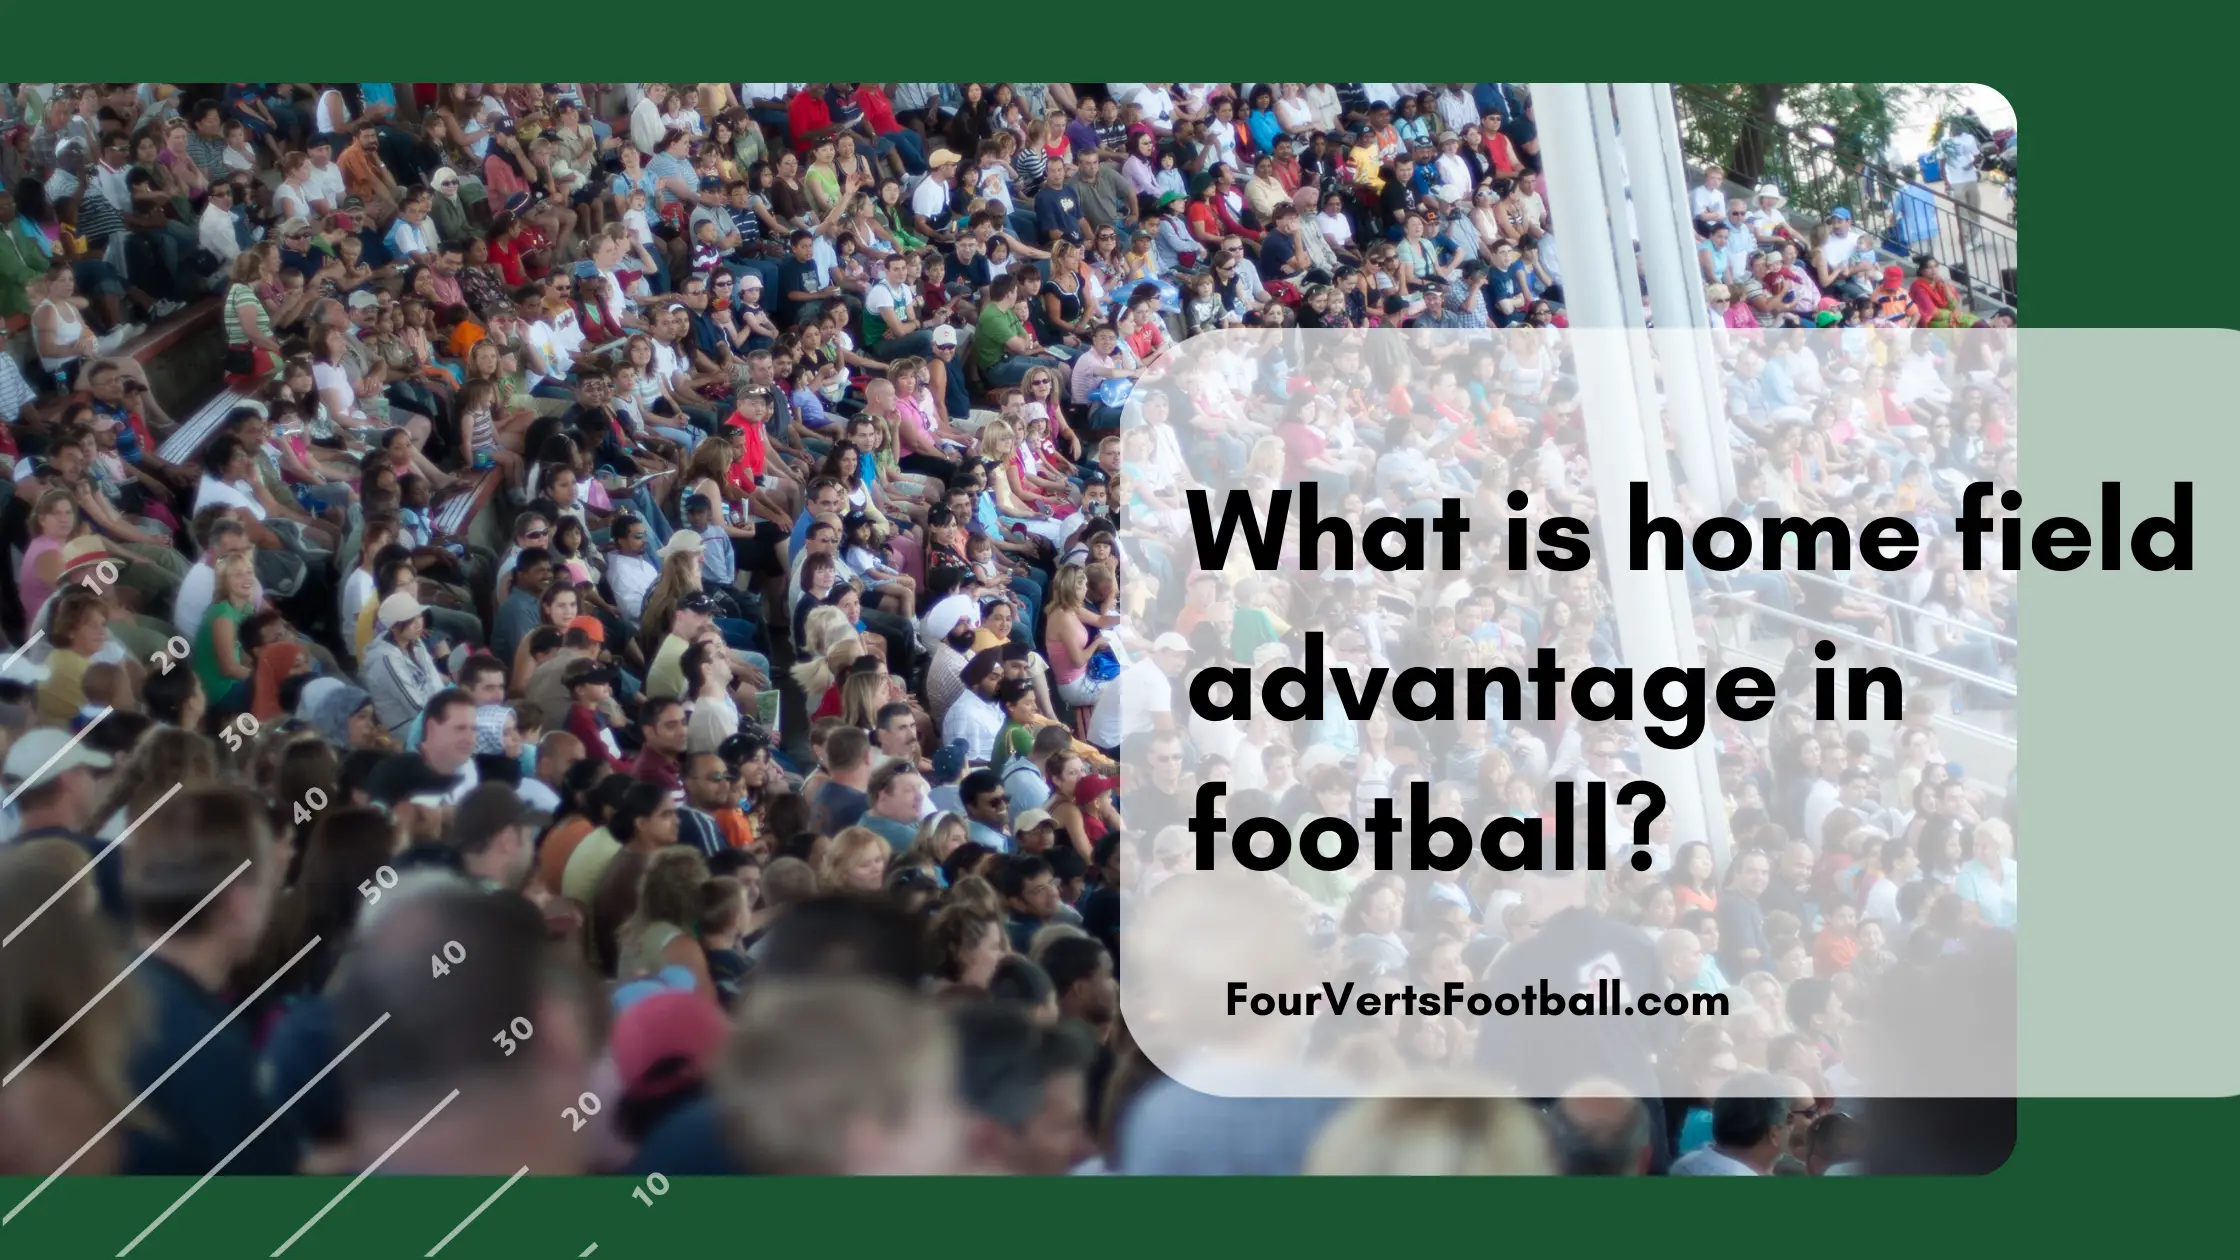 What is home field advantage in football